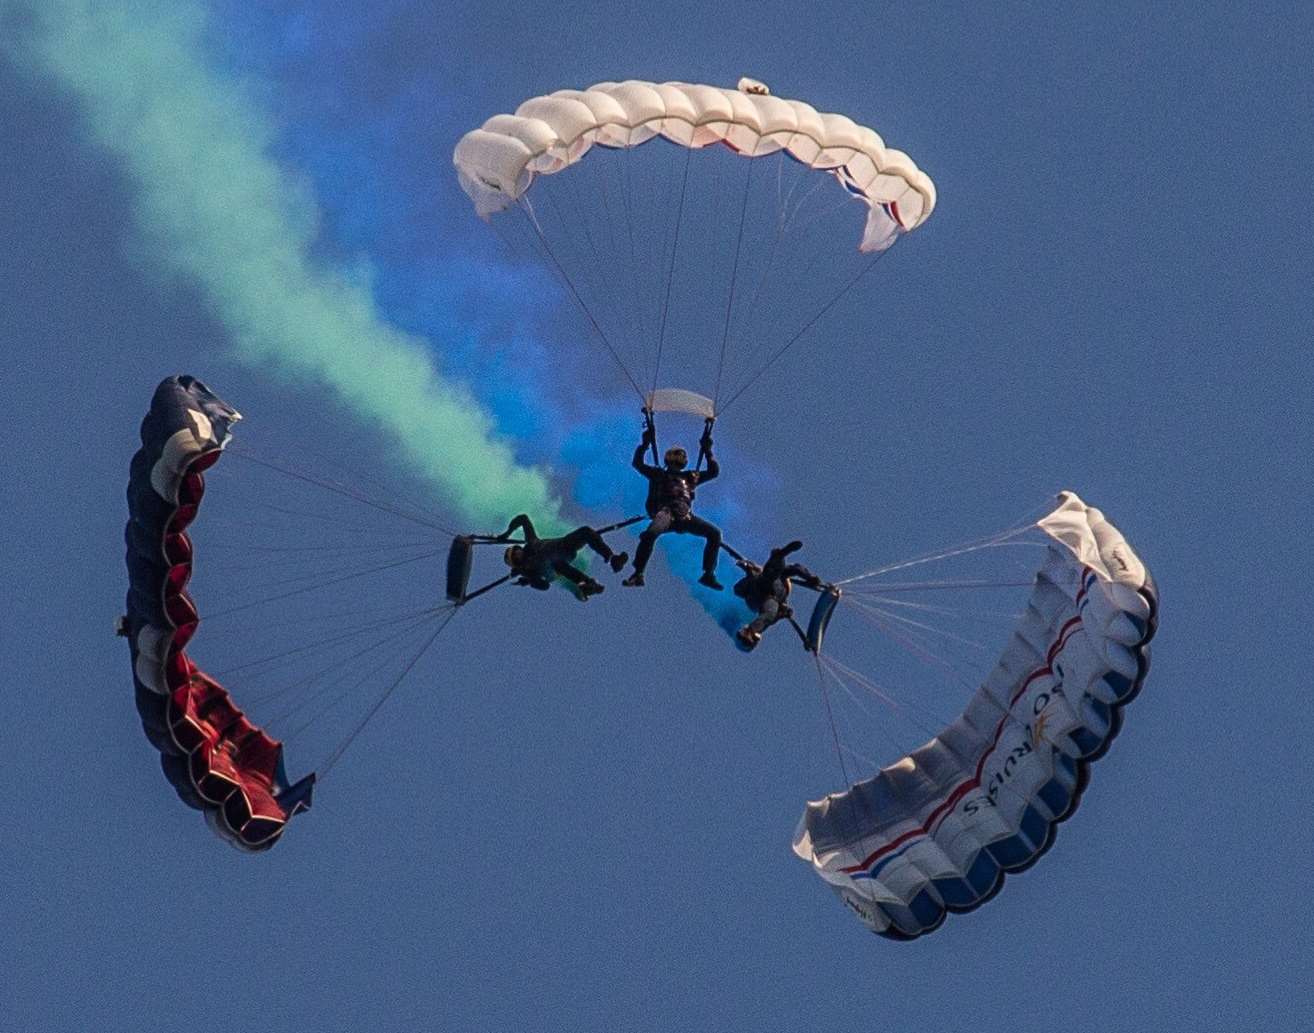 The Tigers parachute team will be dropping in